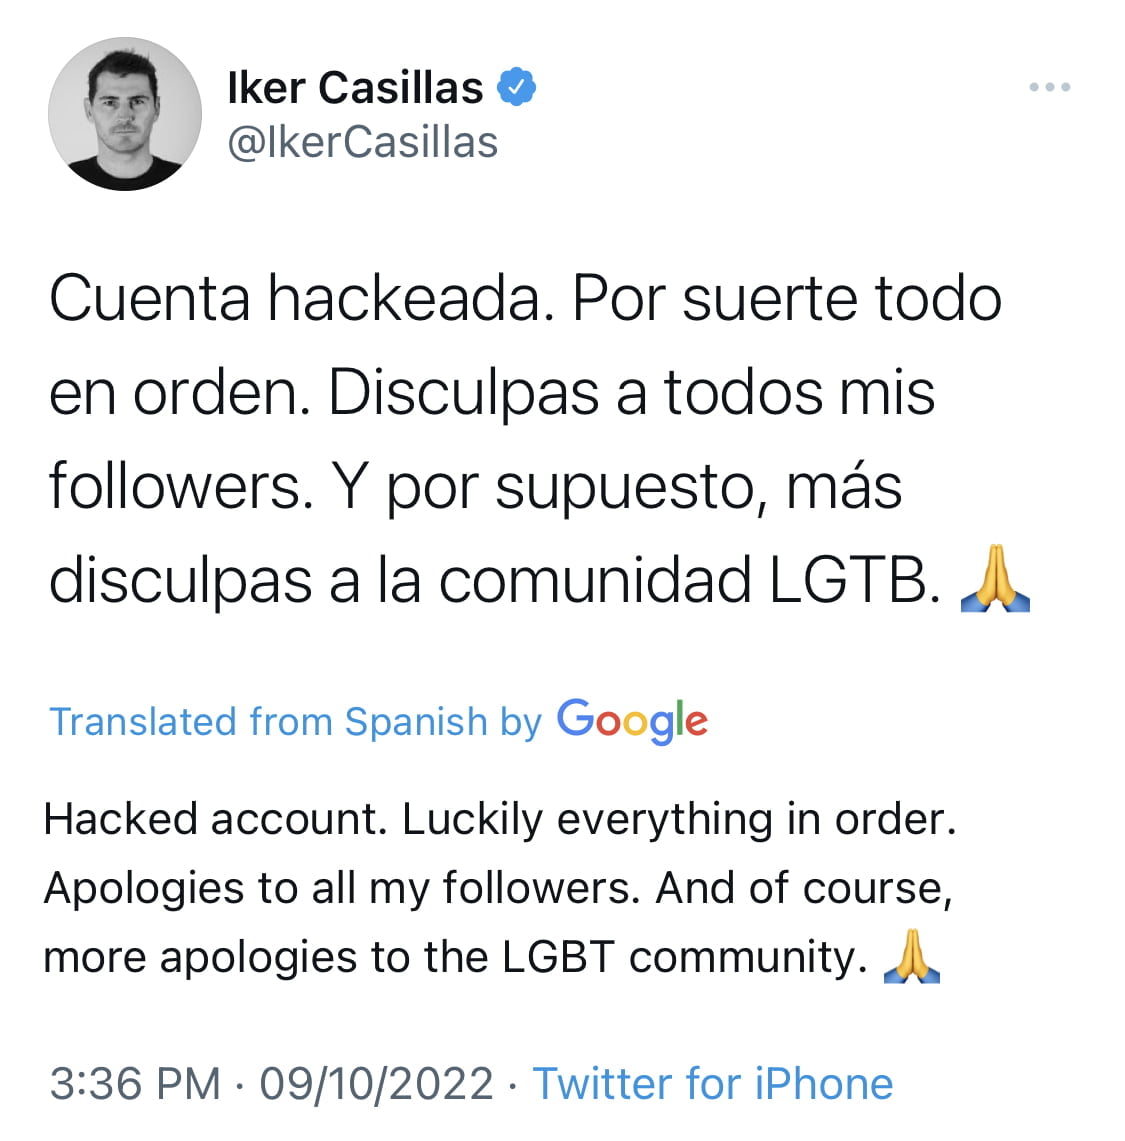 I was hacked - Keeper Casillas makes u-turn on coming out as gay